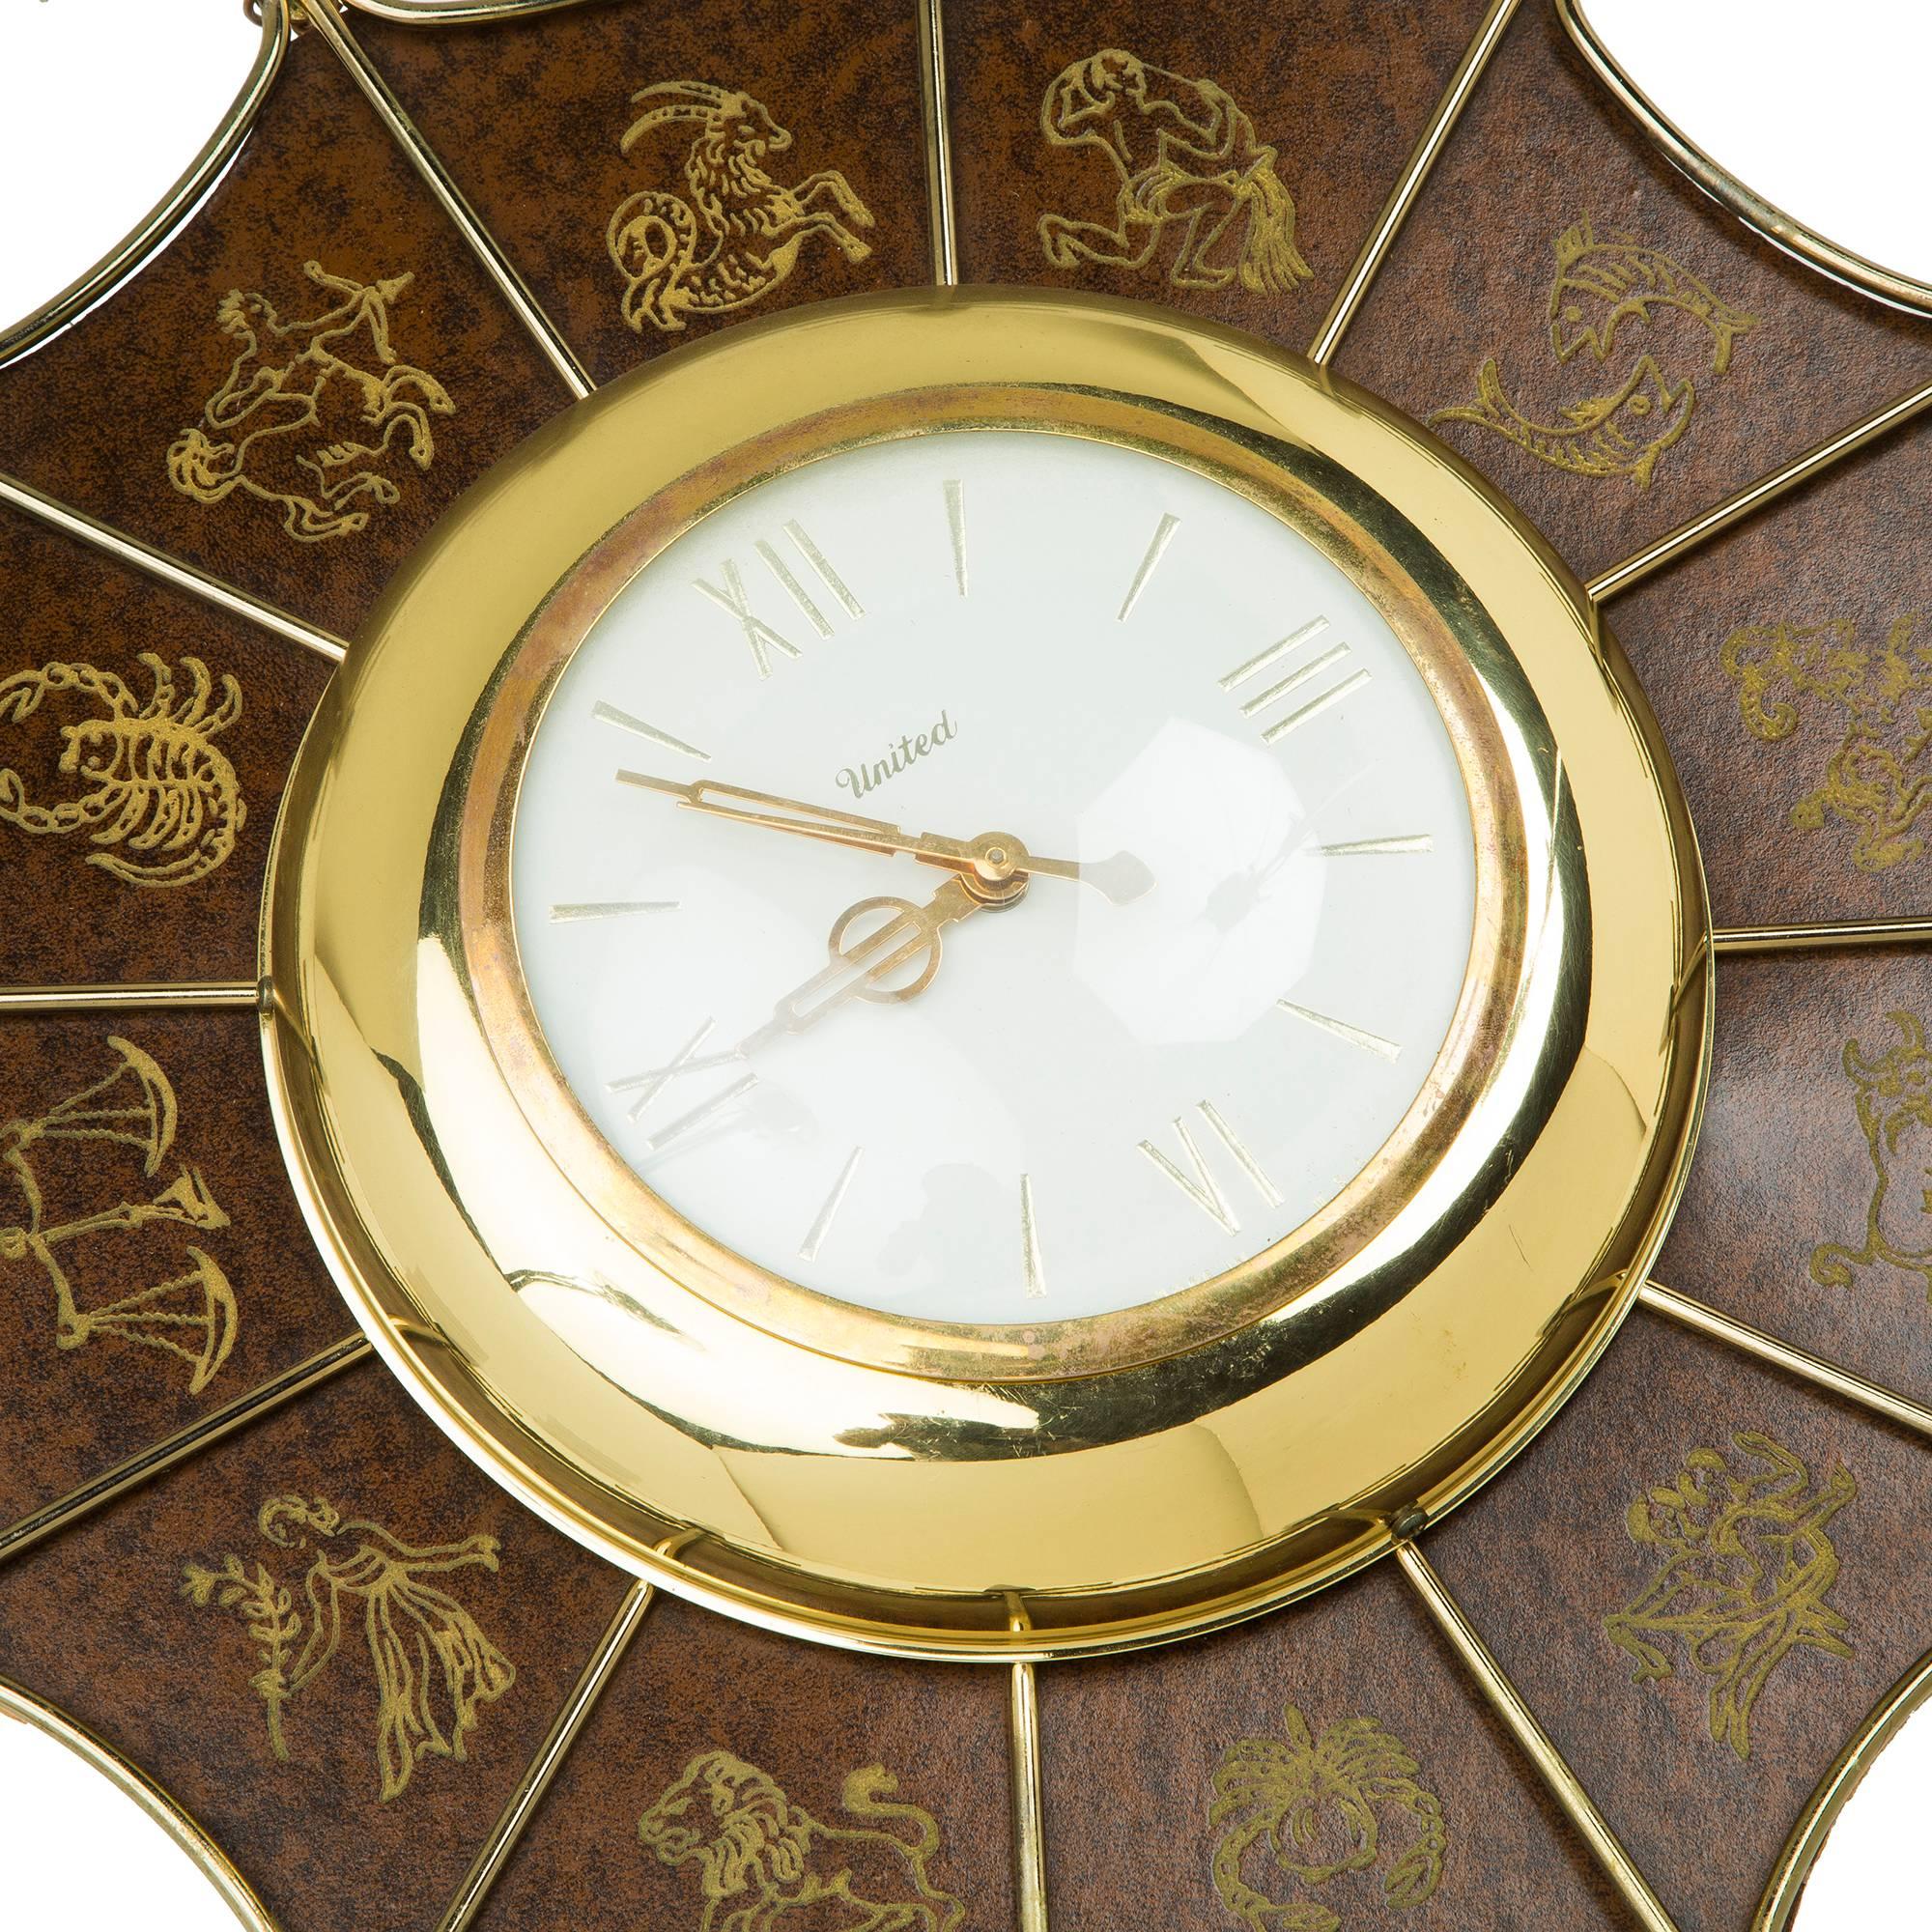 Wonderful starburst clock by United. Featuring twelve wood spindles, faux leather surface finish with embossed symbols of the zodiac, wire frame with white and brass face and Roman numerals. Would pair wonderfully in a chinoiserie styled room, a